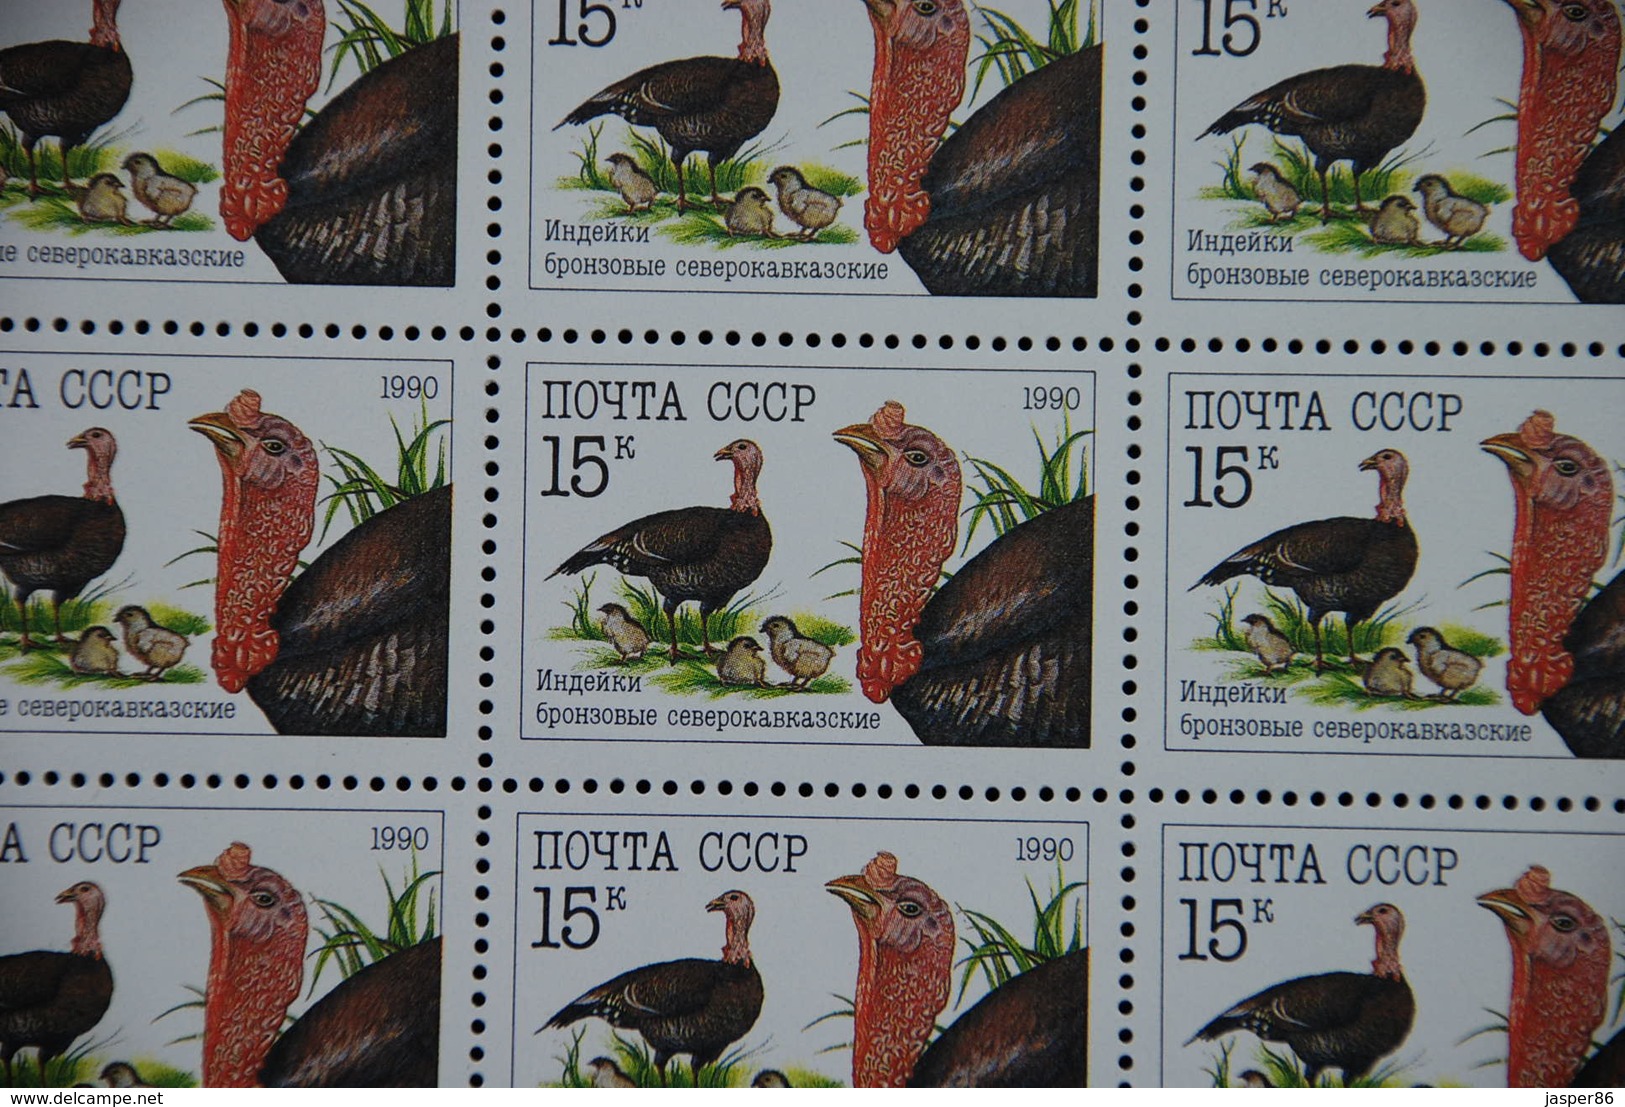 RUSSIA 1990 MNH Sc 5909-5911, Mi 6102-6104 Geese, Rooster, Turkey CV40.00 - Feuilles Complètes